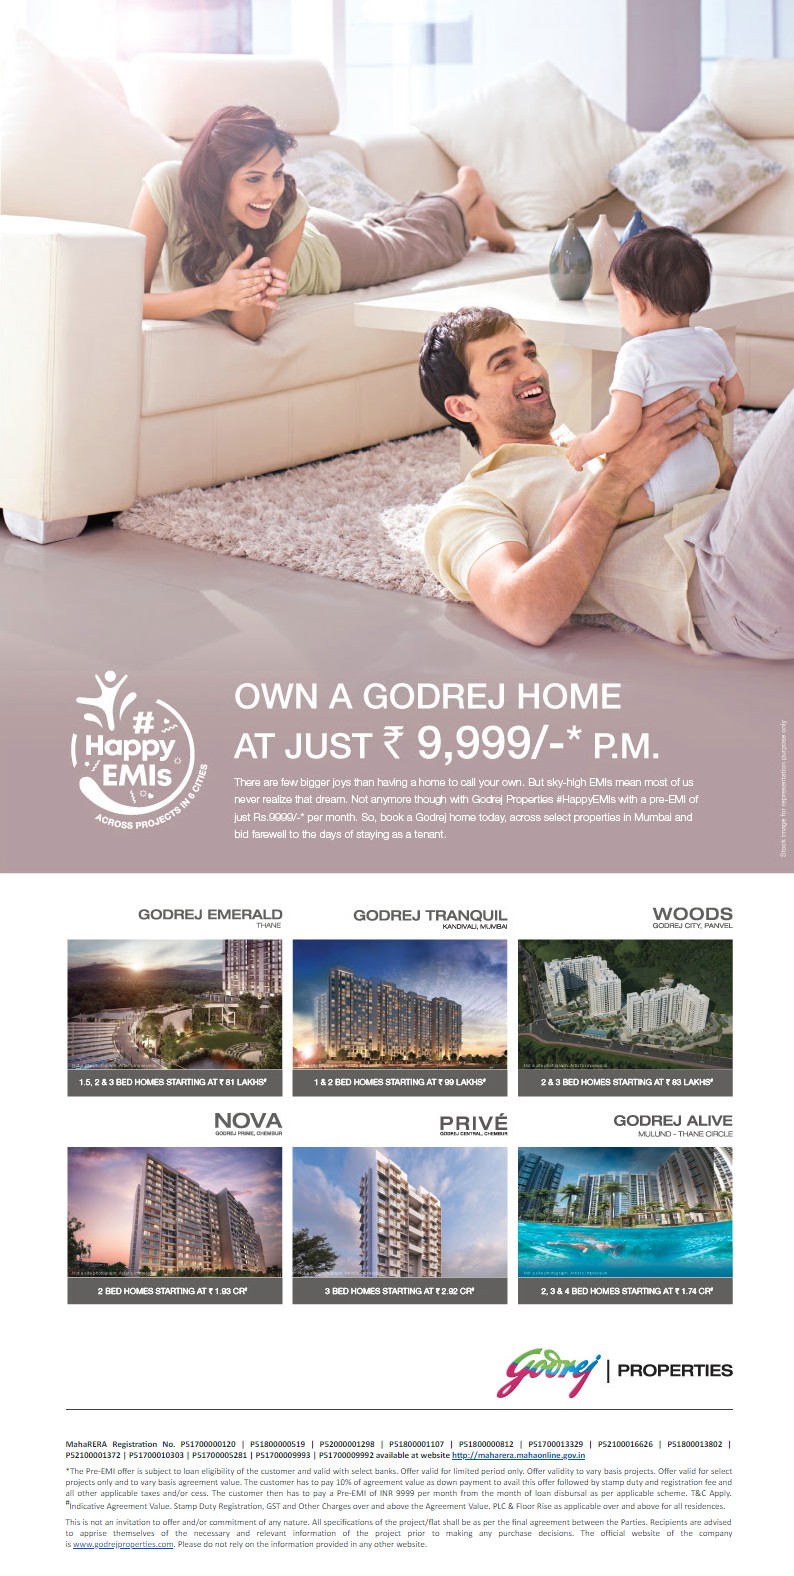 Own a Godrej Home in Mumbai at Rs.9,999 per month with Happy EMIs Scheme Update